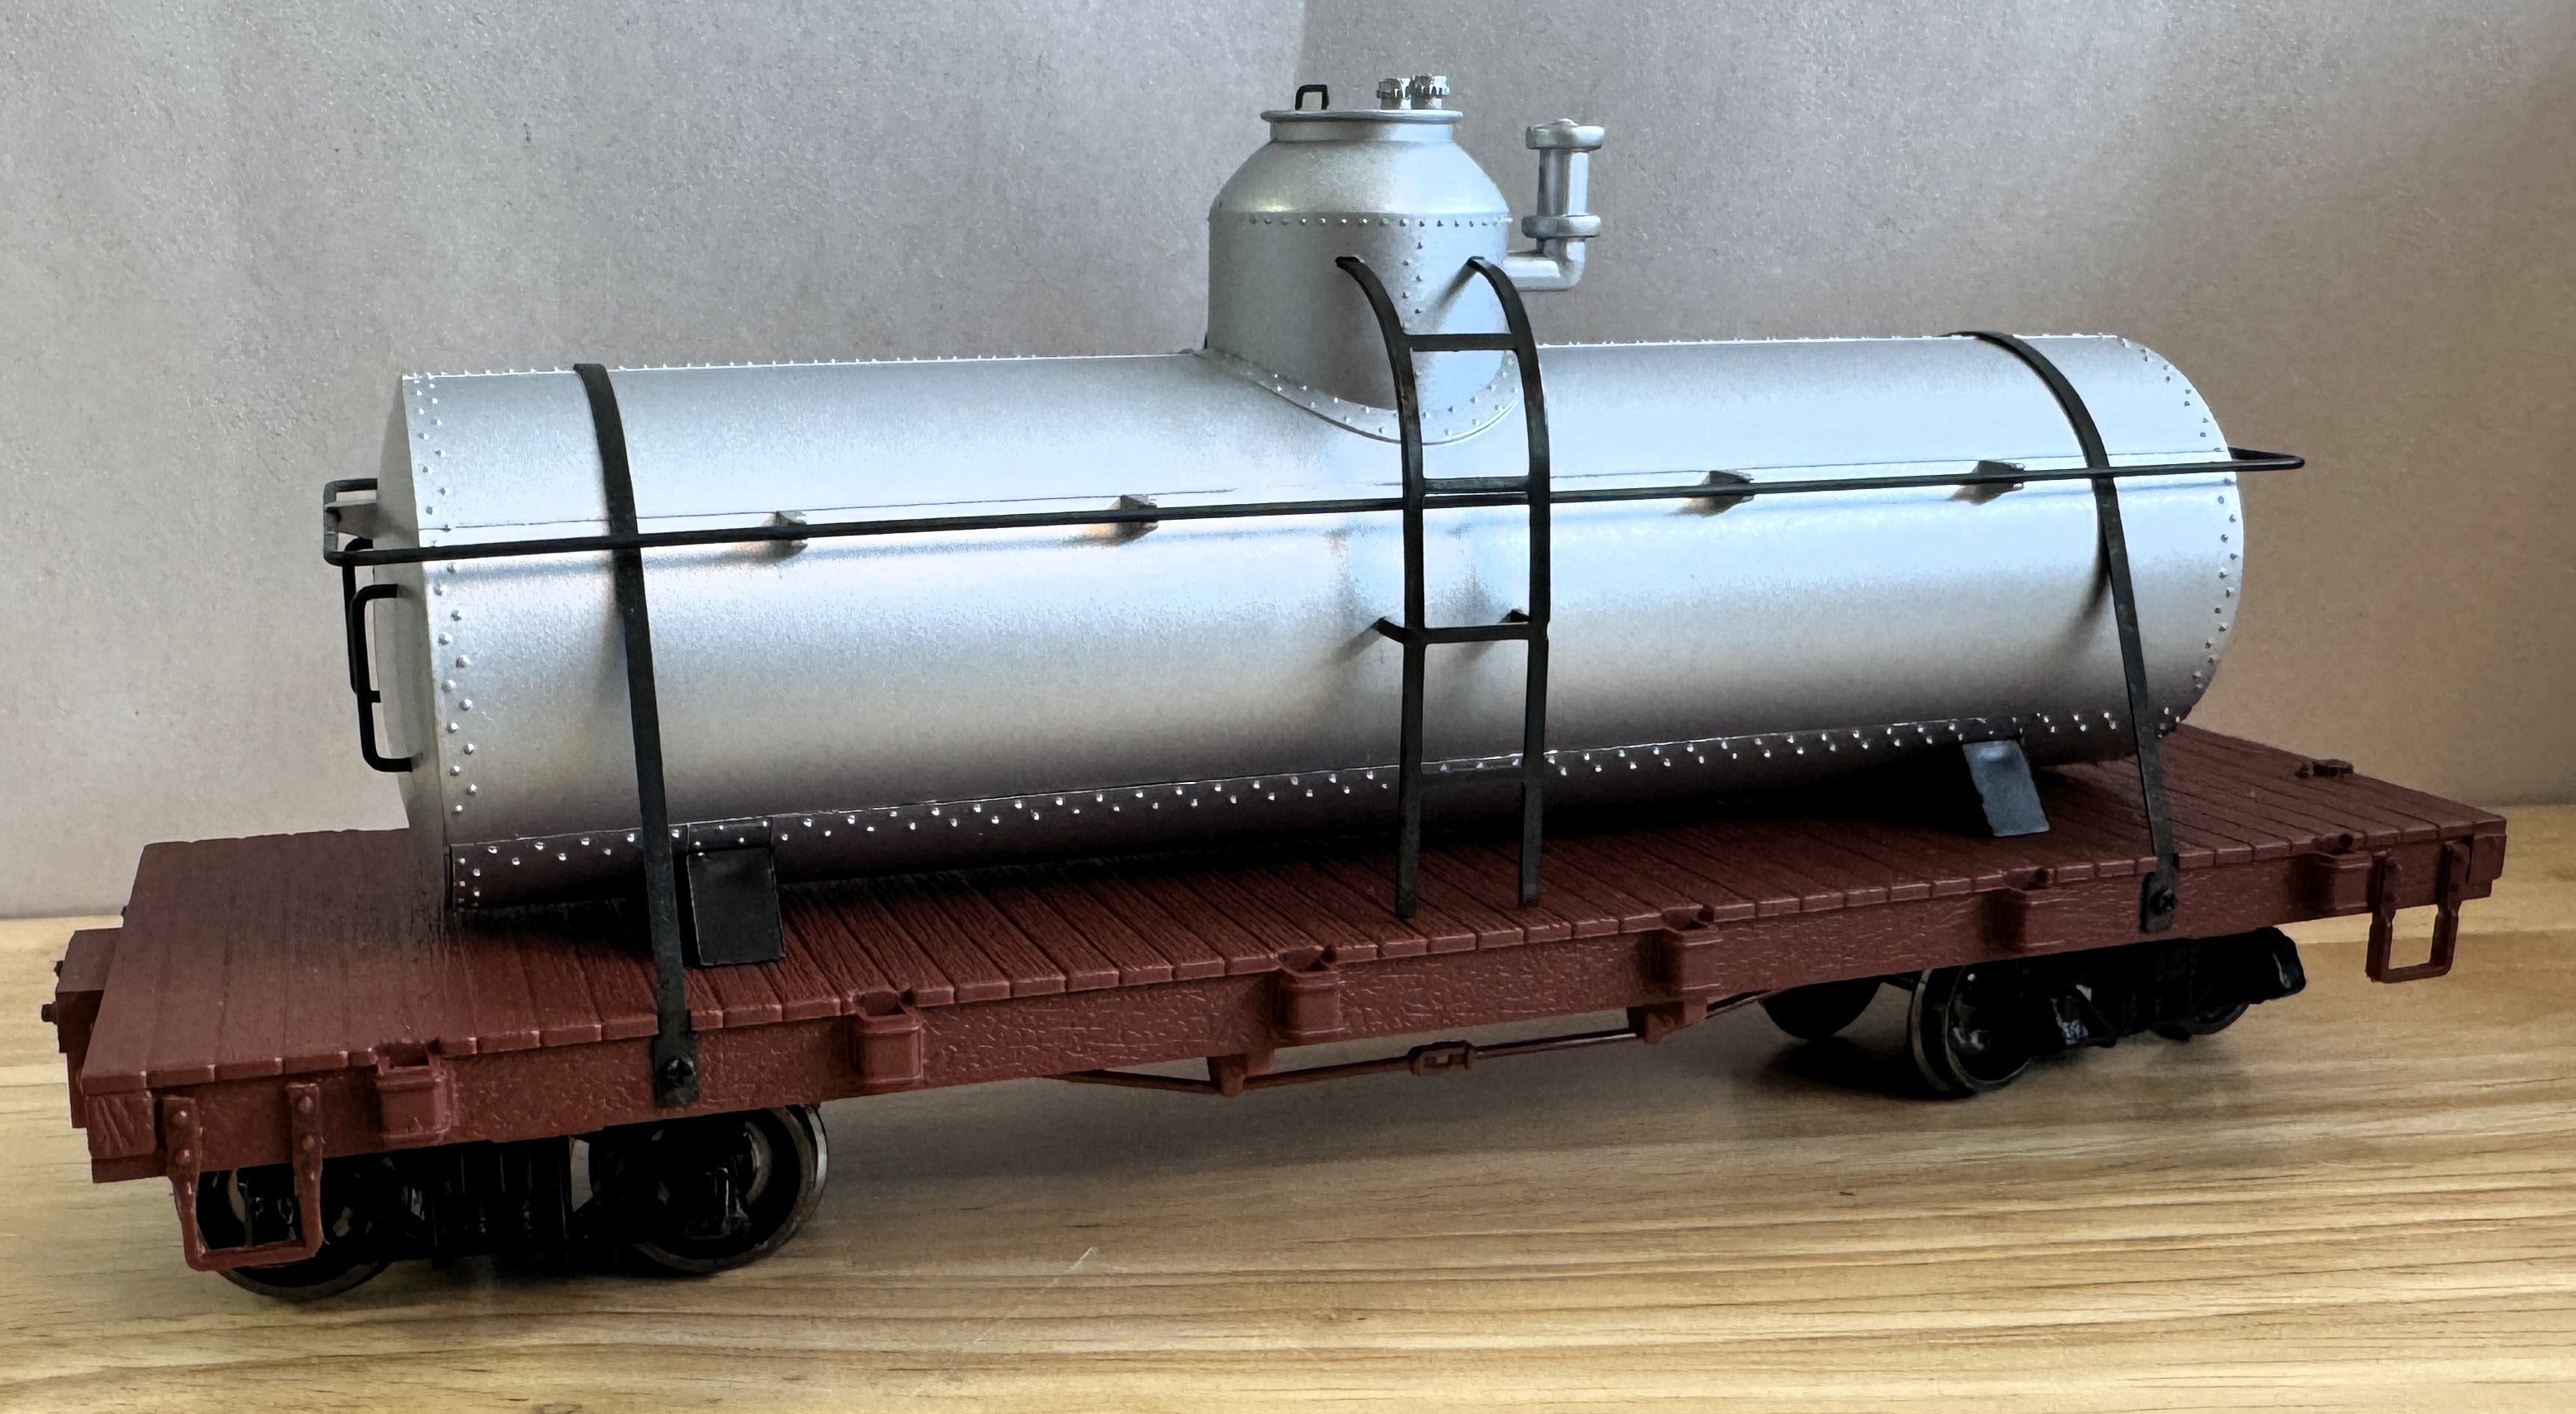 Bachmann Spectrum 27198 HO Scale On30 Scale Painted & Unlettered Silver Tank Car-Second hand-M1465